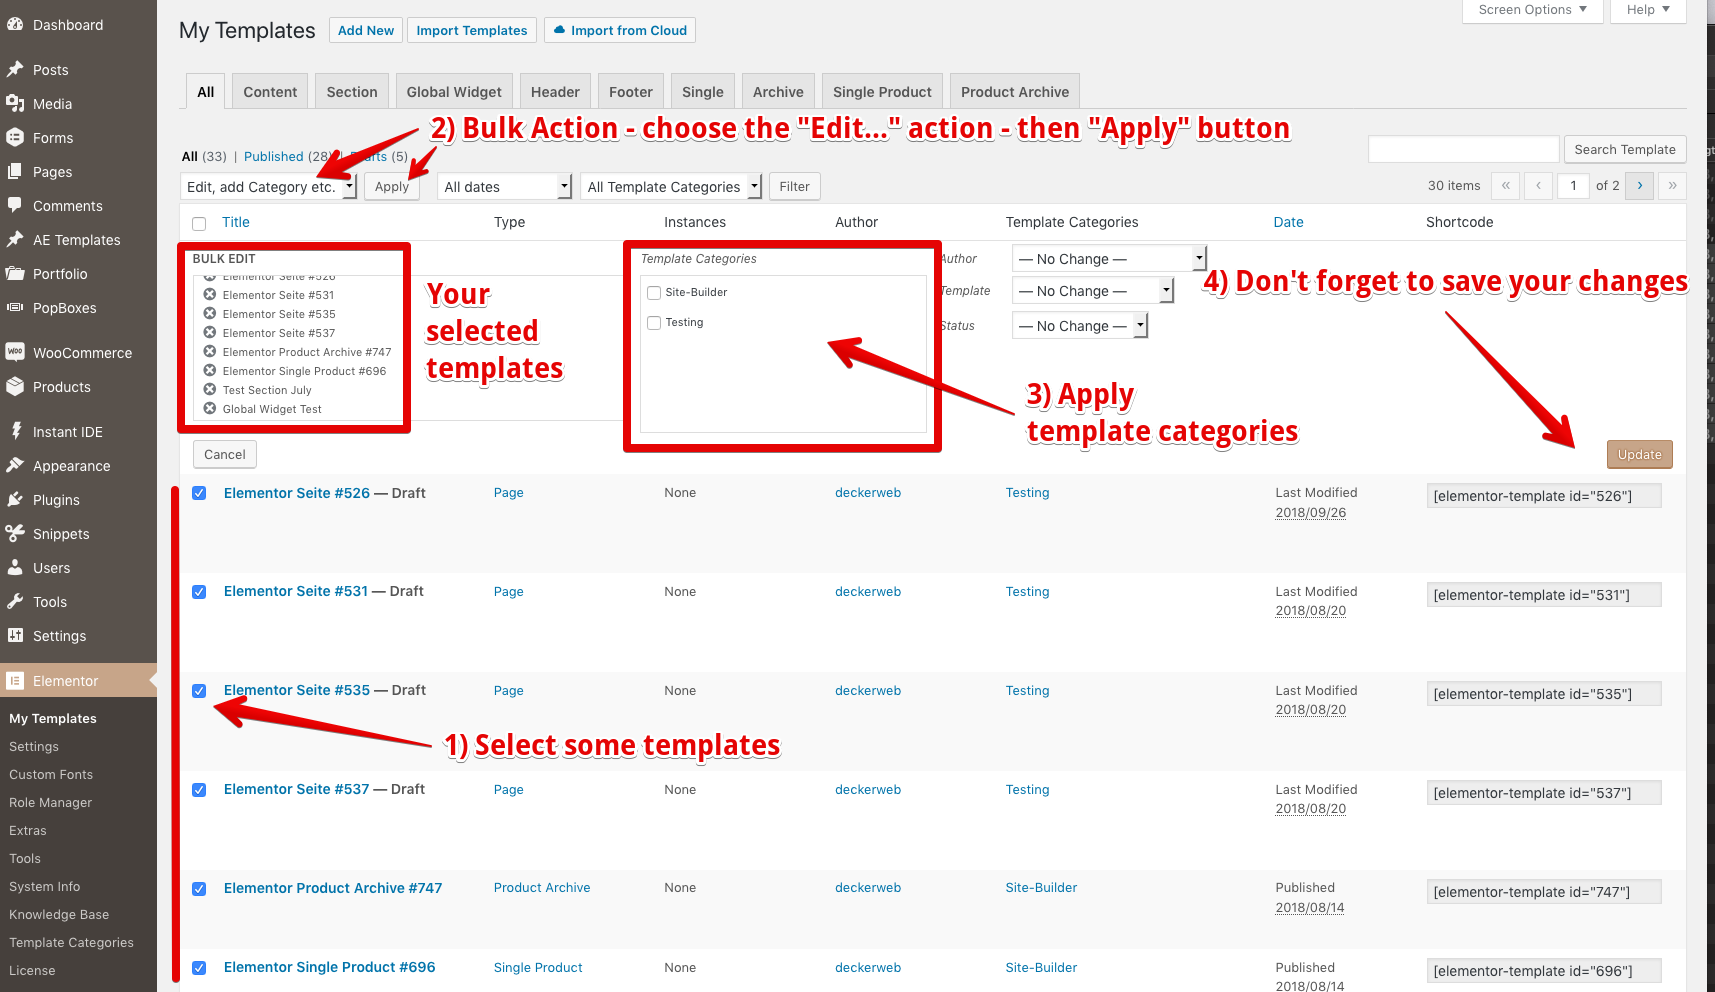 Post type Bulk Actions: Add a template category to selected templates in one action step